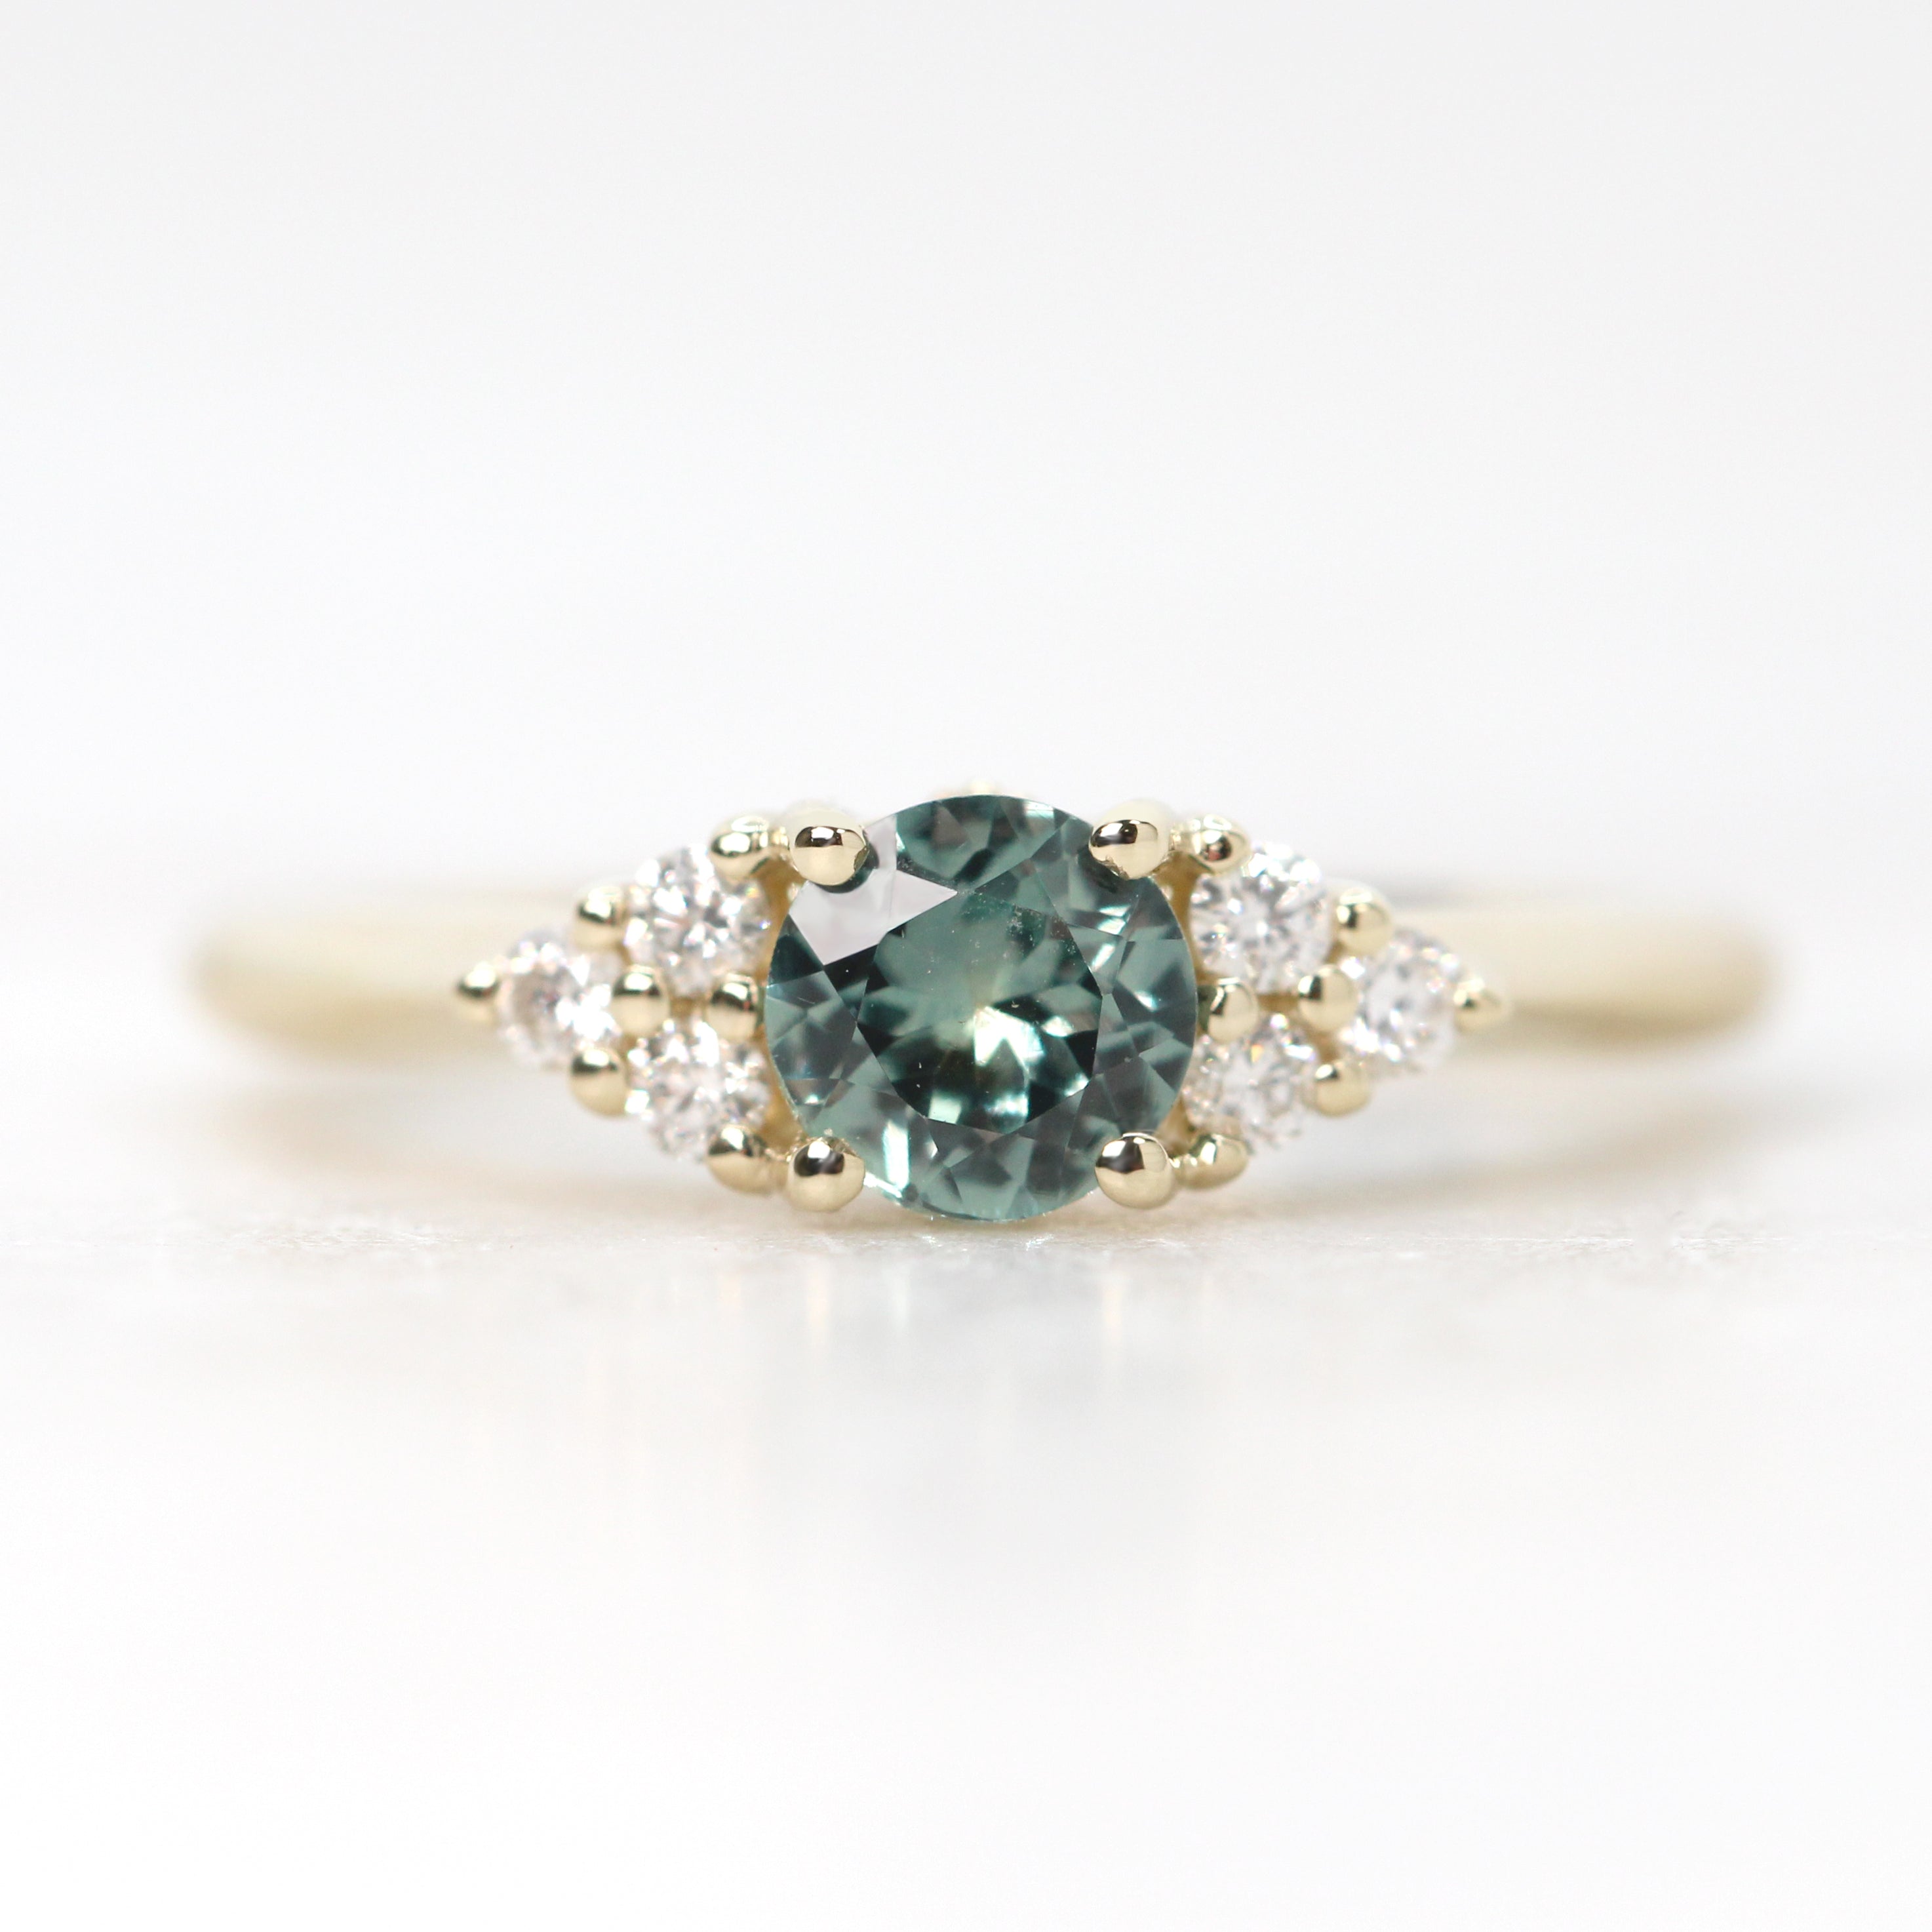 Aster Ring with a 0.57 Carat Light Teal Round Montana Sapphire and White Accent Diamonds in 14k Yellow Gold - Ready to Size and Ship - Midwinter Co. Alternative Bridal Rings and Modern Fine Jewelry